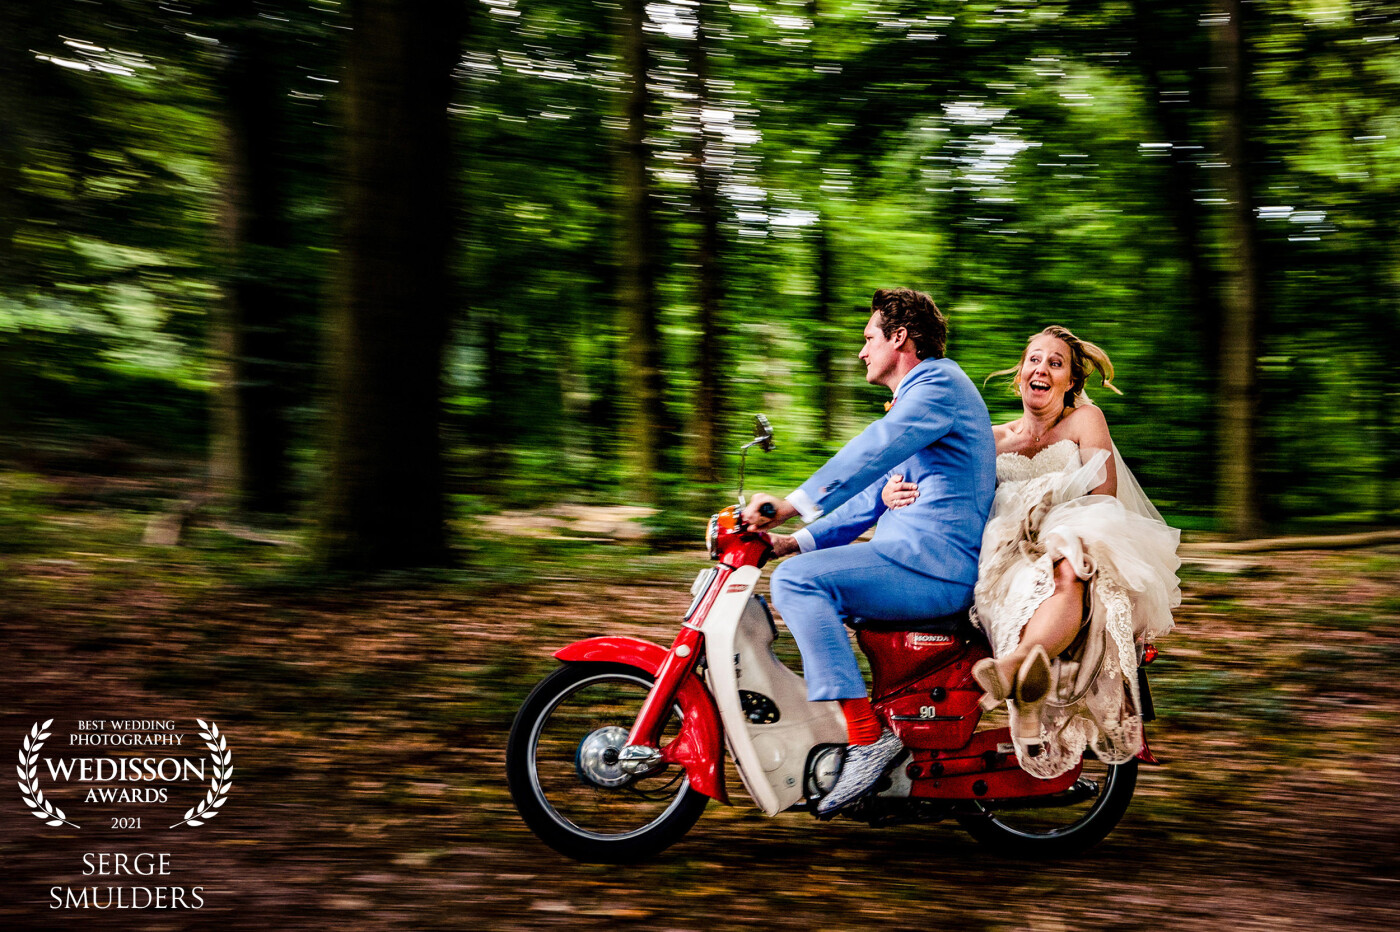 What a great wedding this was! The scooter was the second love of the groom :) so his scooter had to be in a picture for there album! I used the panning technique together with an off camera flash!